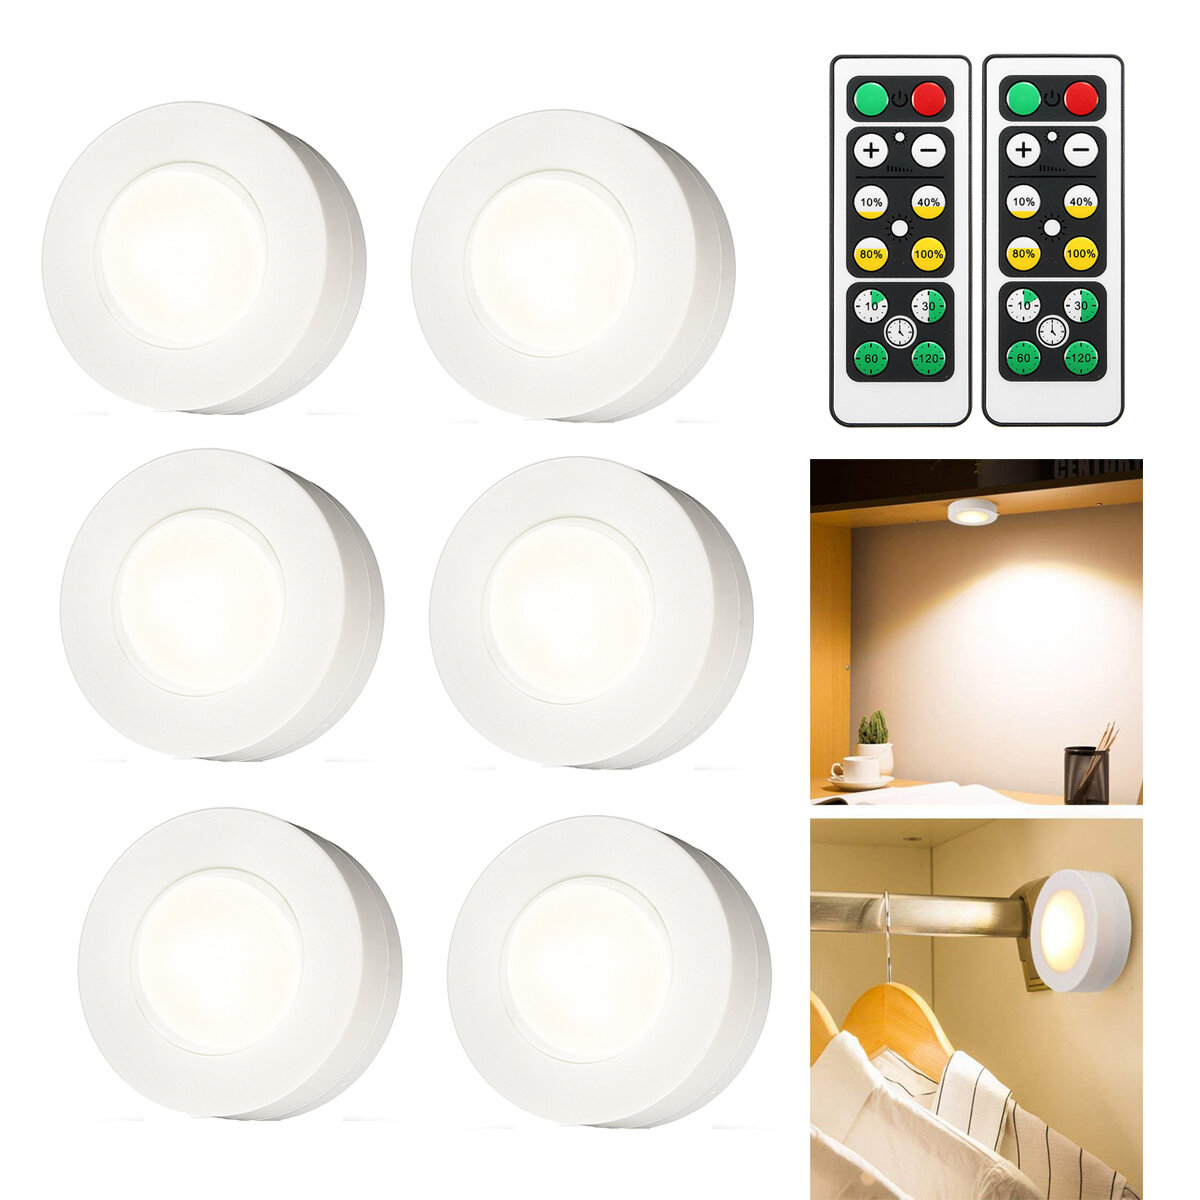 

6PCS Battery Powered LED Under Cabinet Kitchen Counter Night Light + 2 Wireless Remote Control